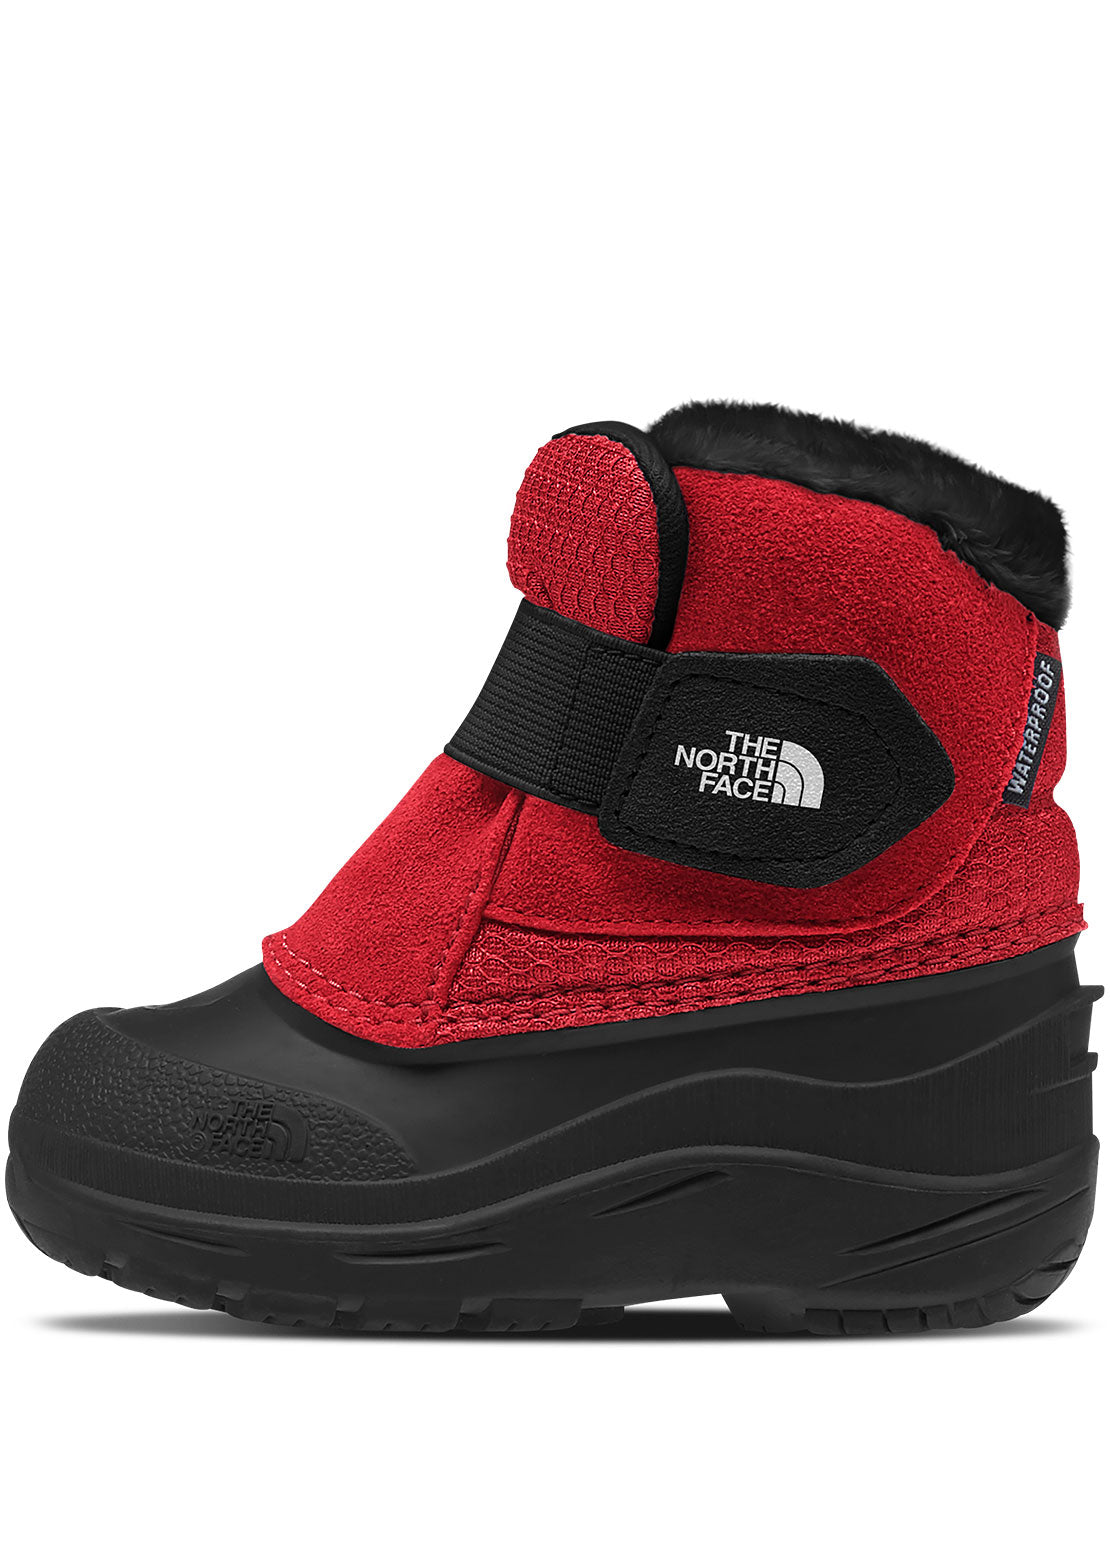 The North Face Toddler Alpenglow II Boots Fiery Red/TNF Black